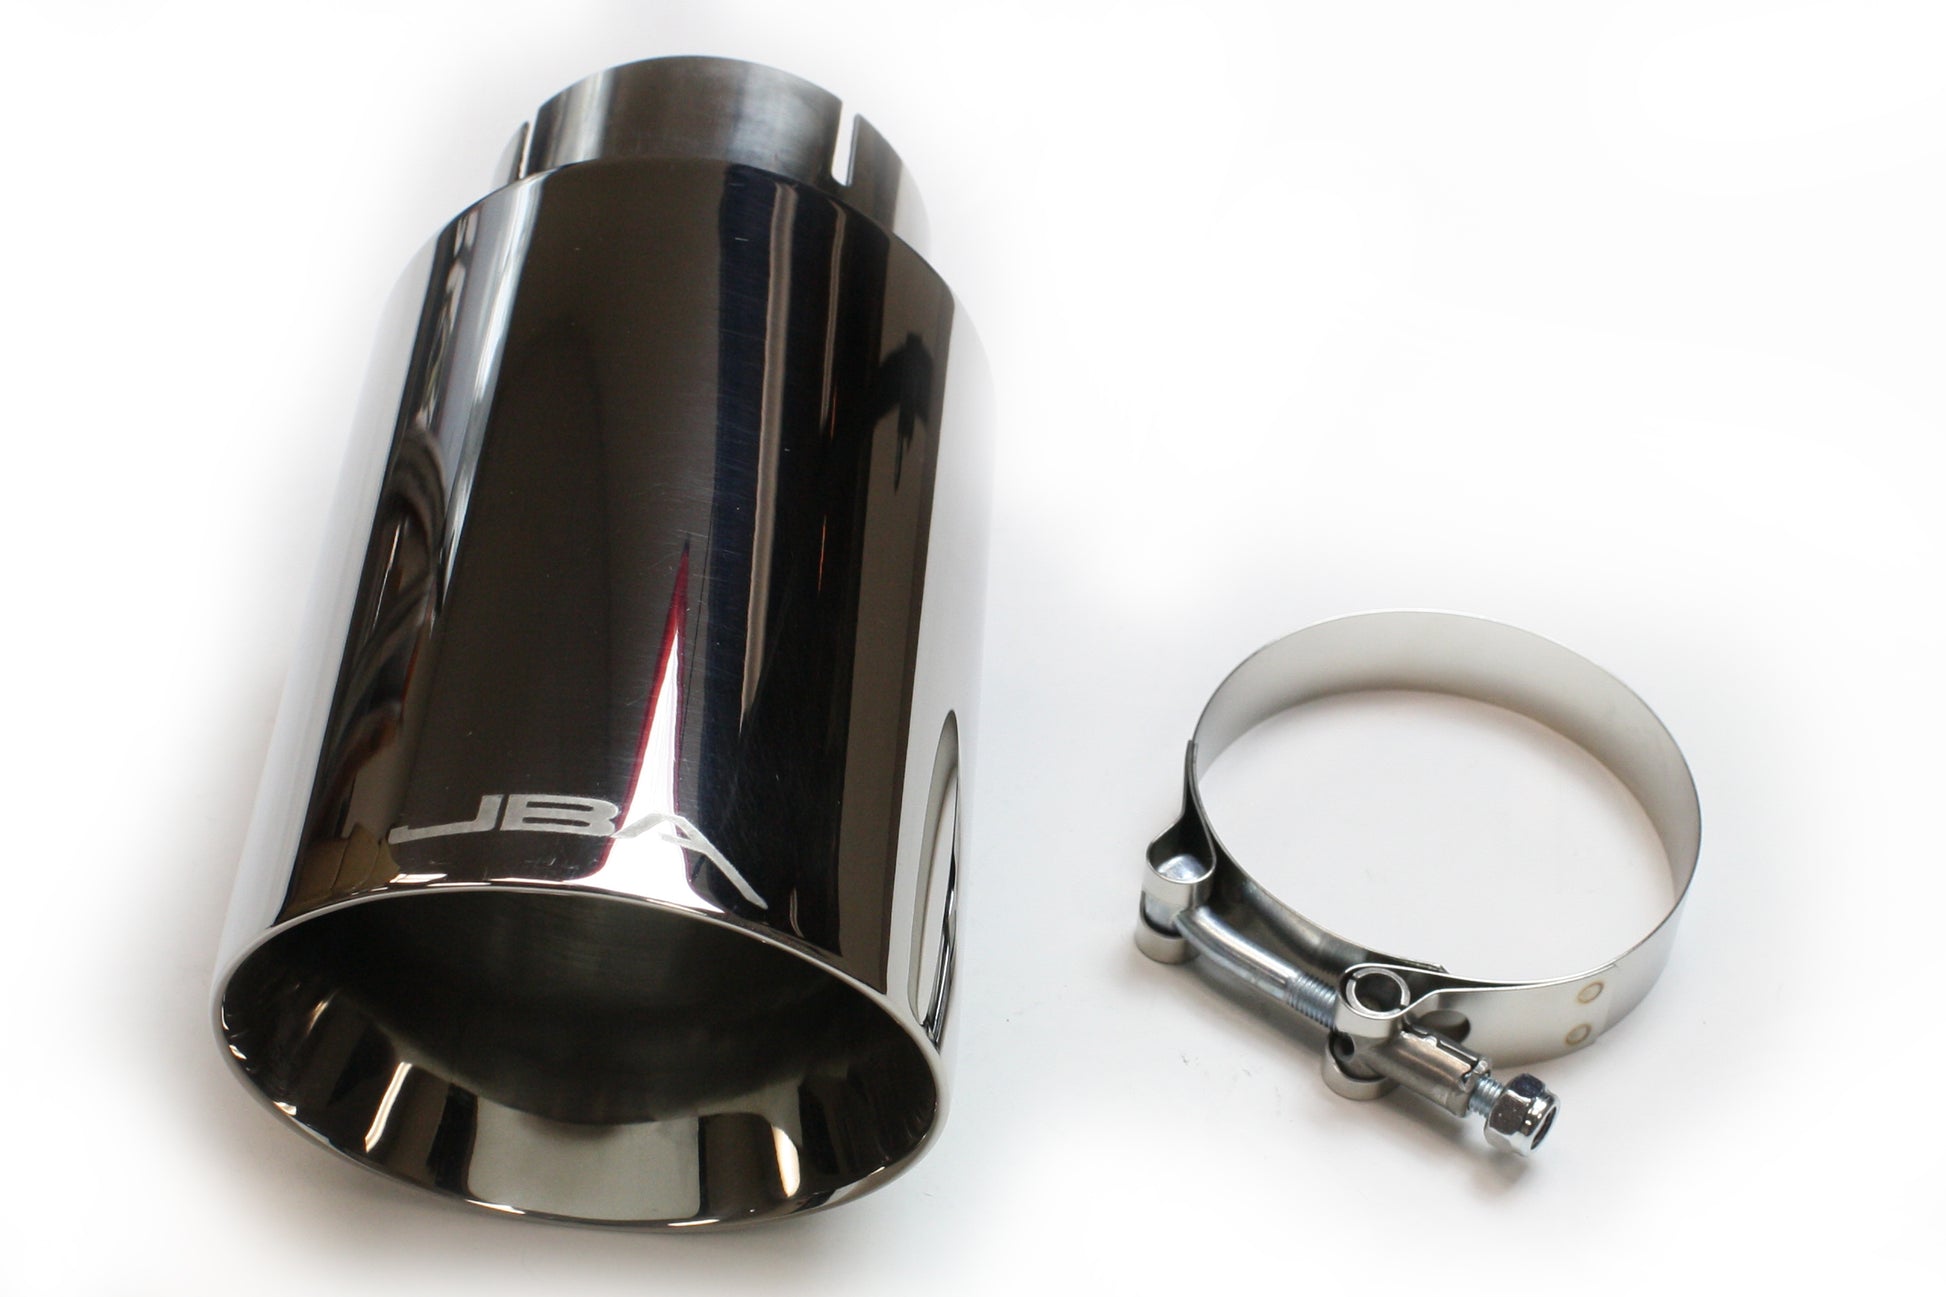 JBA Performance Exhaust 12-08282 2.5” x 4.5” x 8 1/4” Double Wall Polished S/S Chrome Tip - Clamp on